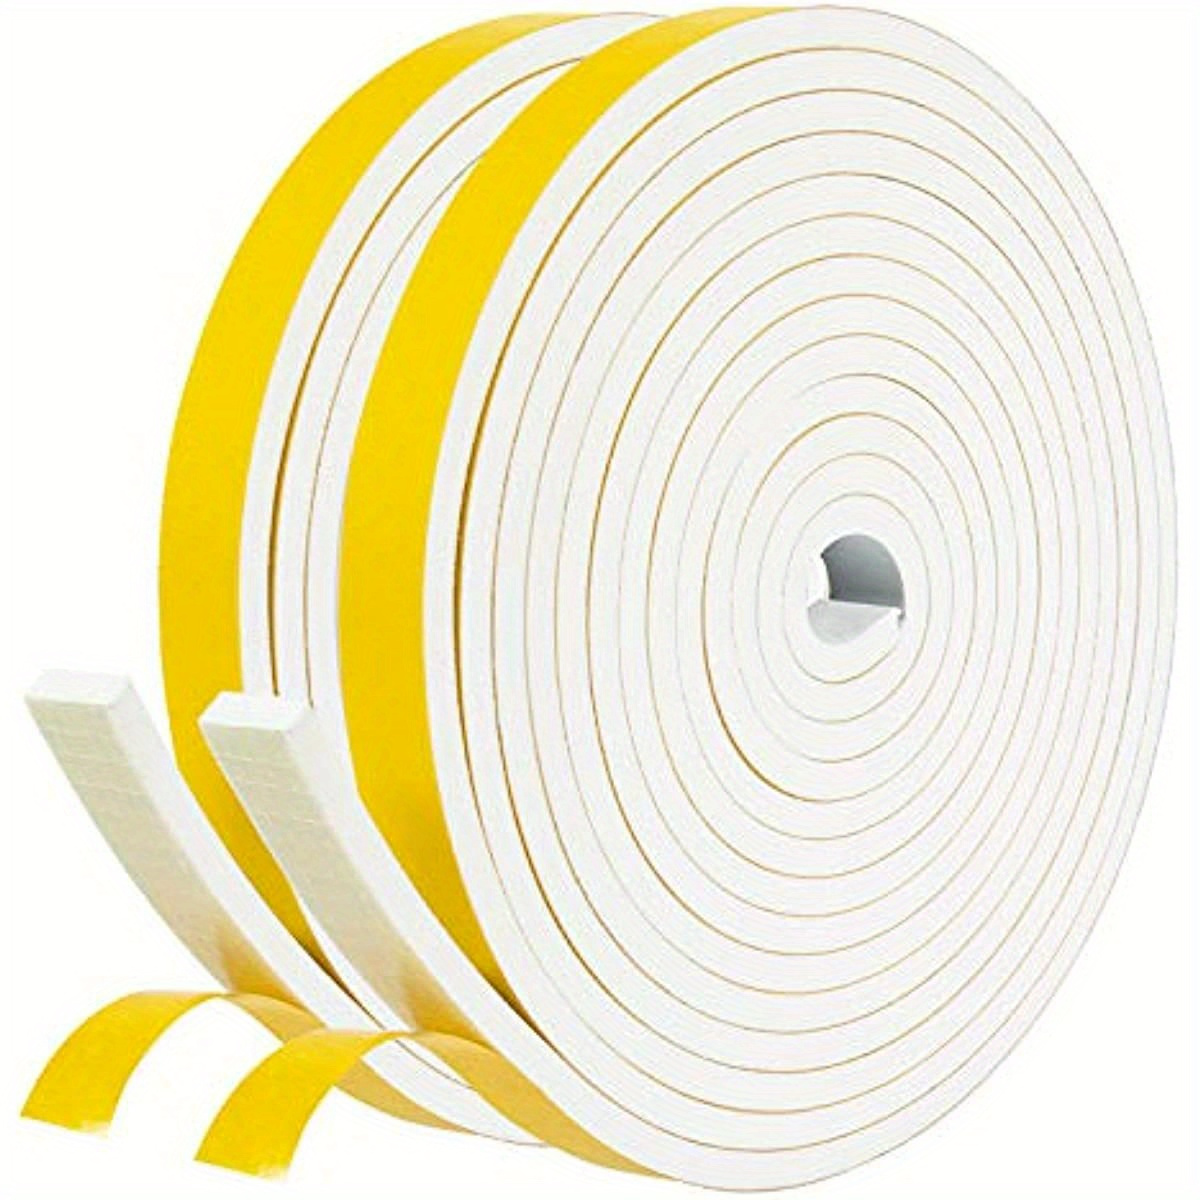 2 Rolls 2 Inch W 1/2 Inch T Weather Stripping Air Conditioner Open Cell  Foam Seal Tape, Window Insulation High Resilience Seal Strip for Doors